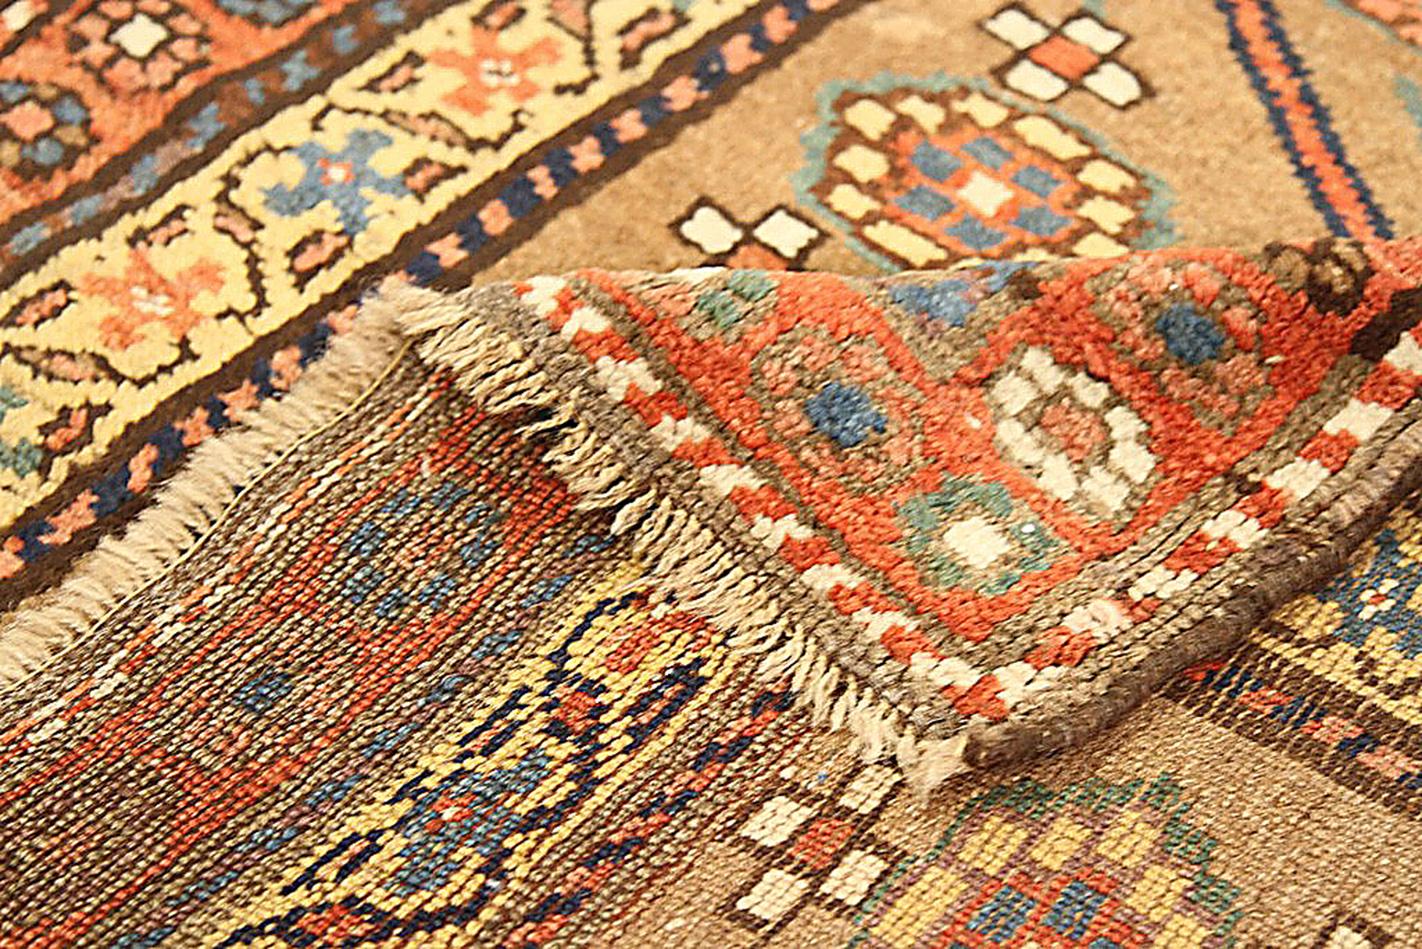 Hand-Woven Antique Persian Bijar Runner Rug with Orange & Yellow Floral Medallions For Sale